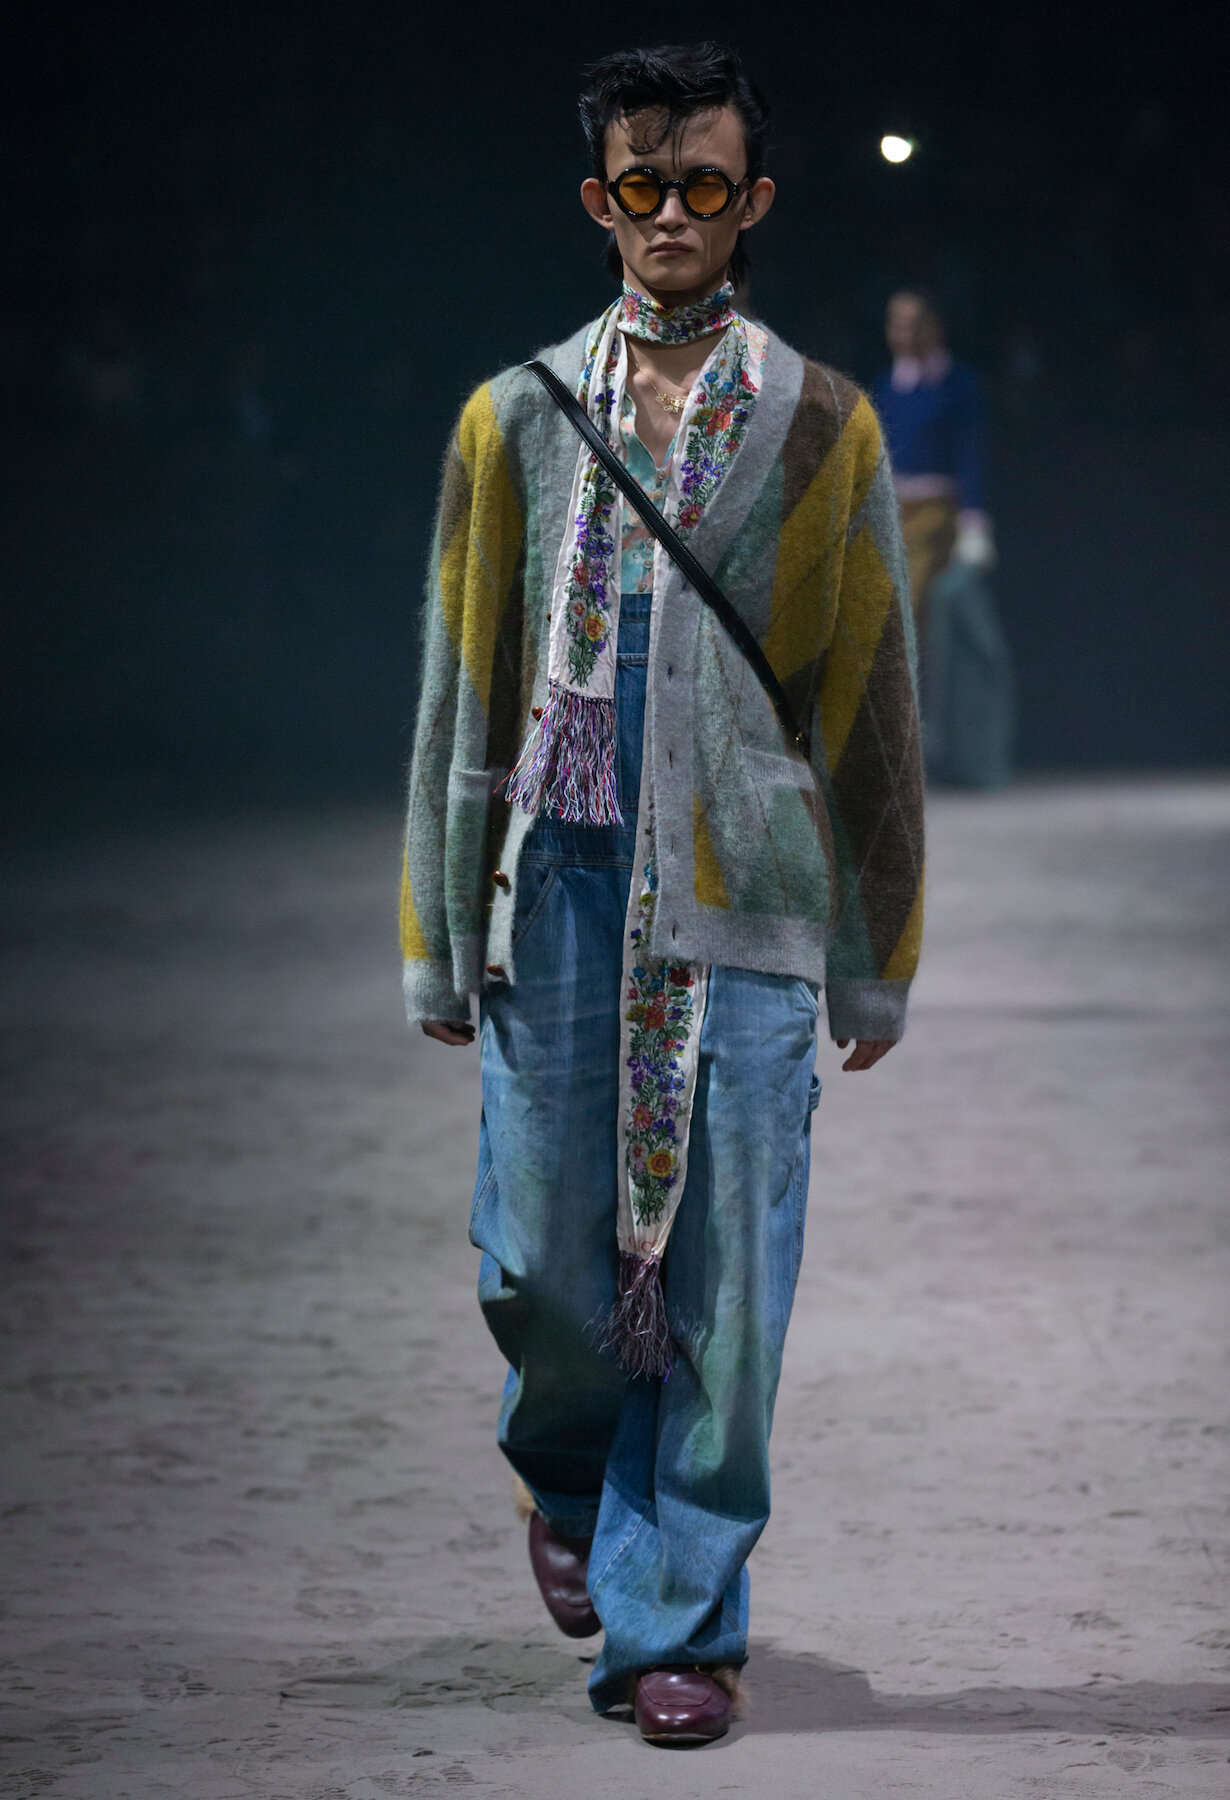 Gucci Fall Winter 2020 Men_s Collection (Look 11).jpg